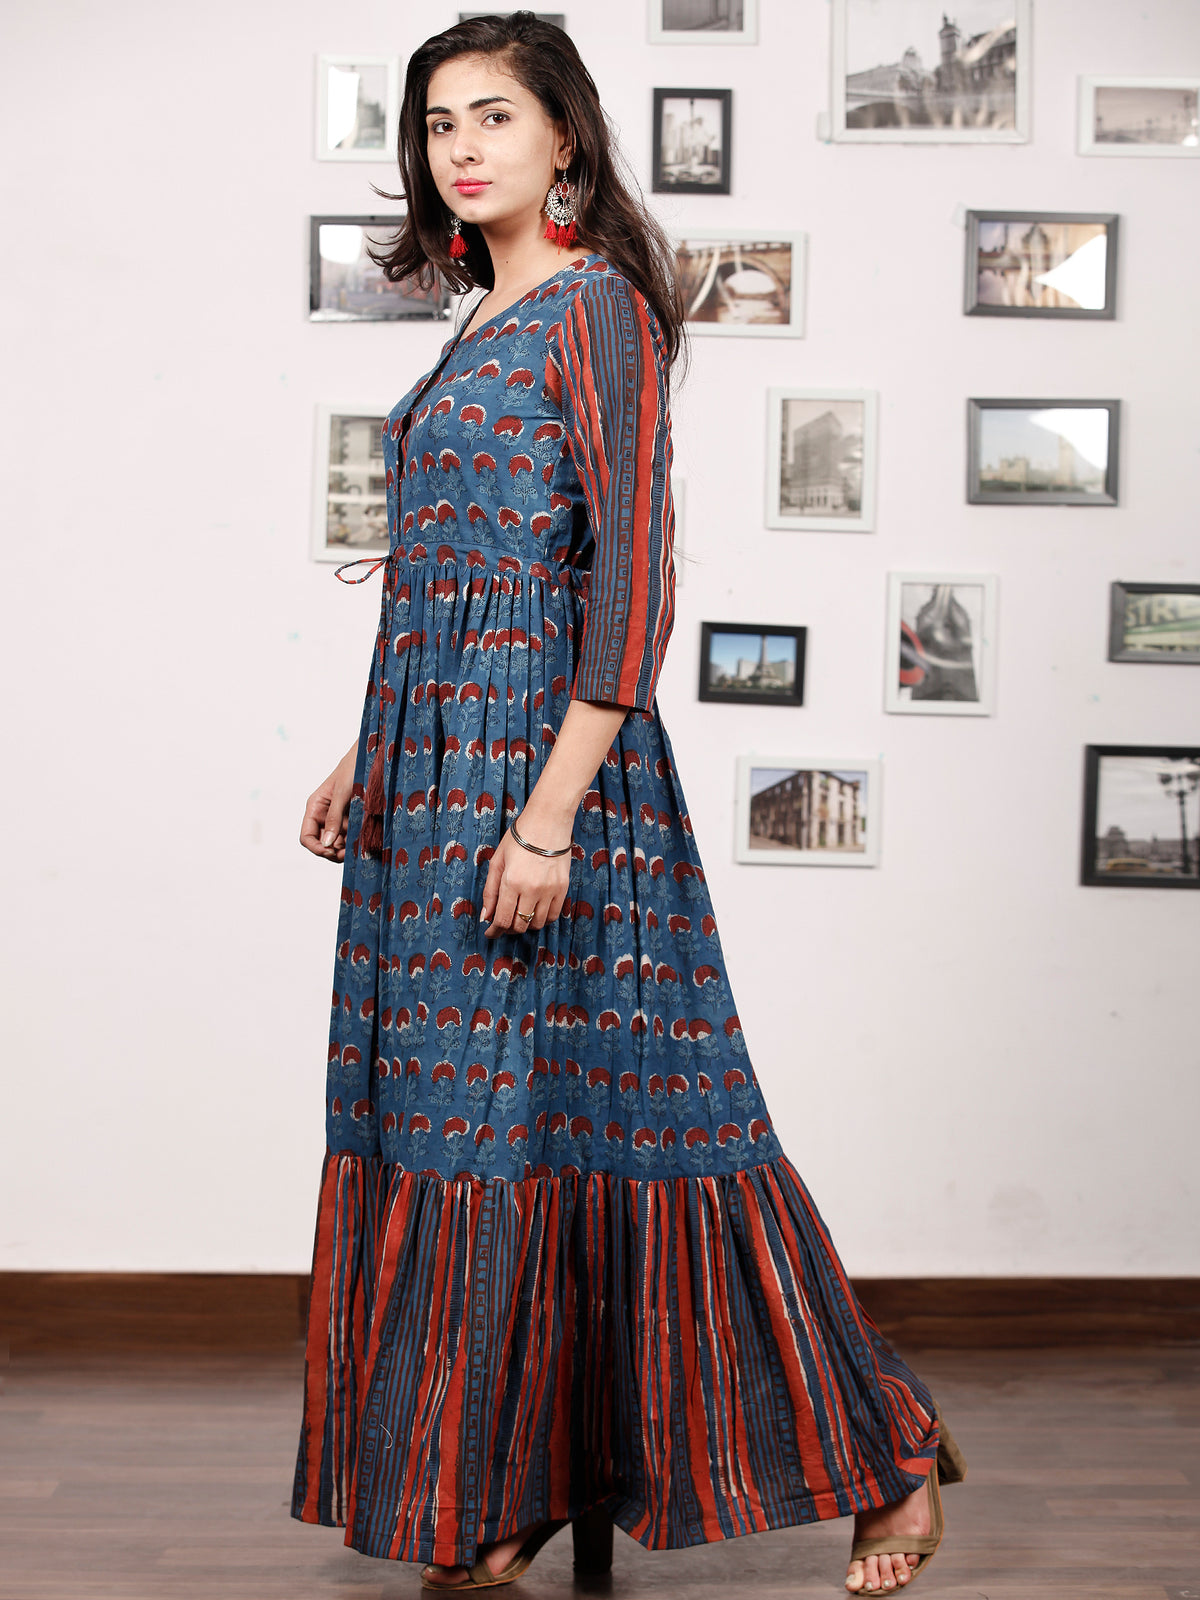 TRENDY RUSSET - Hand Block Printed Cotton Long Dress With Tie Up Waist -  D170F1336